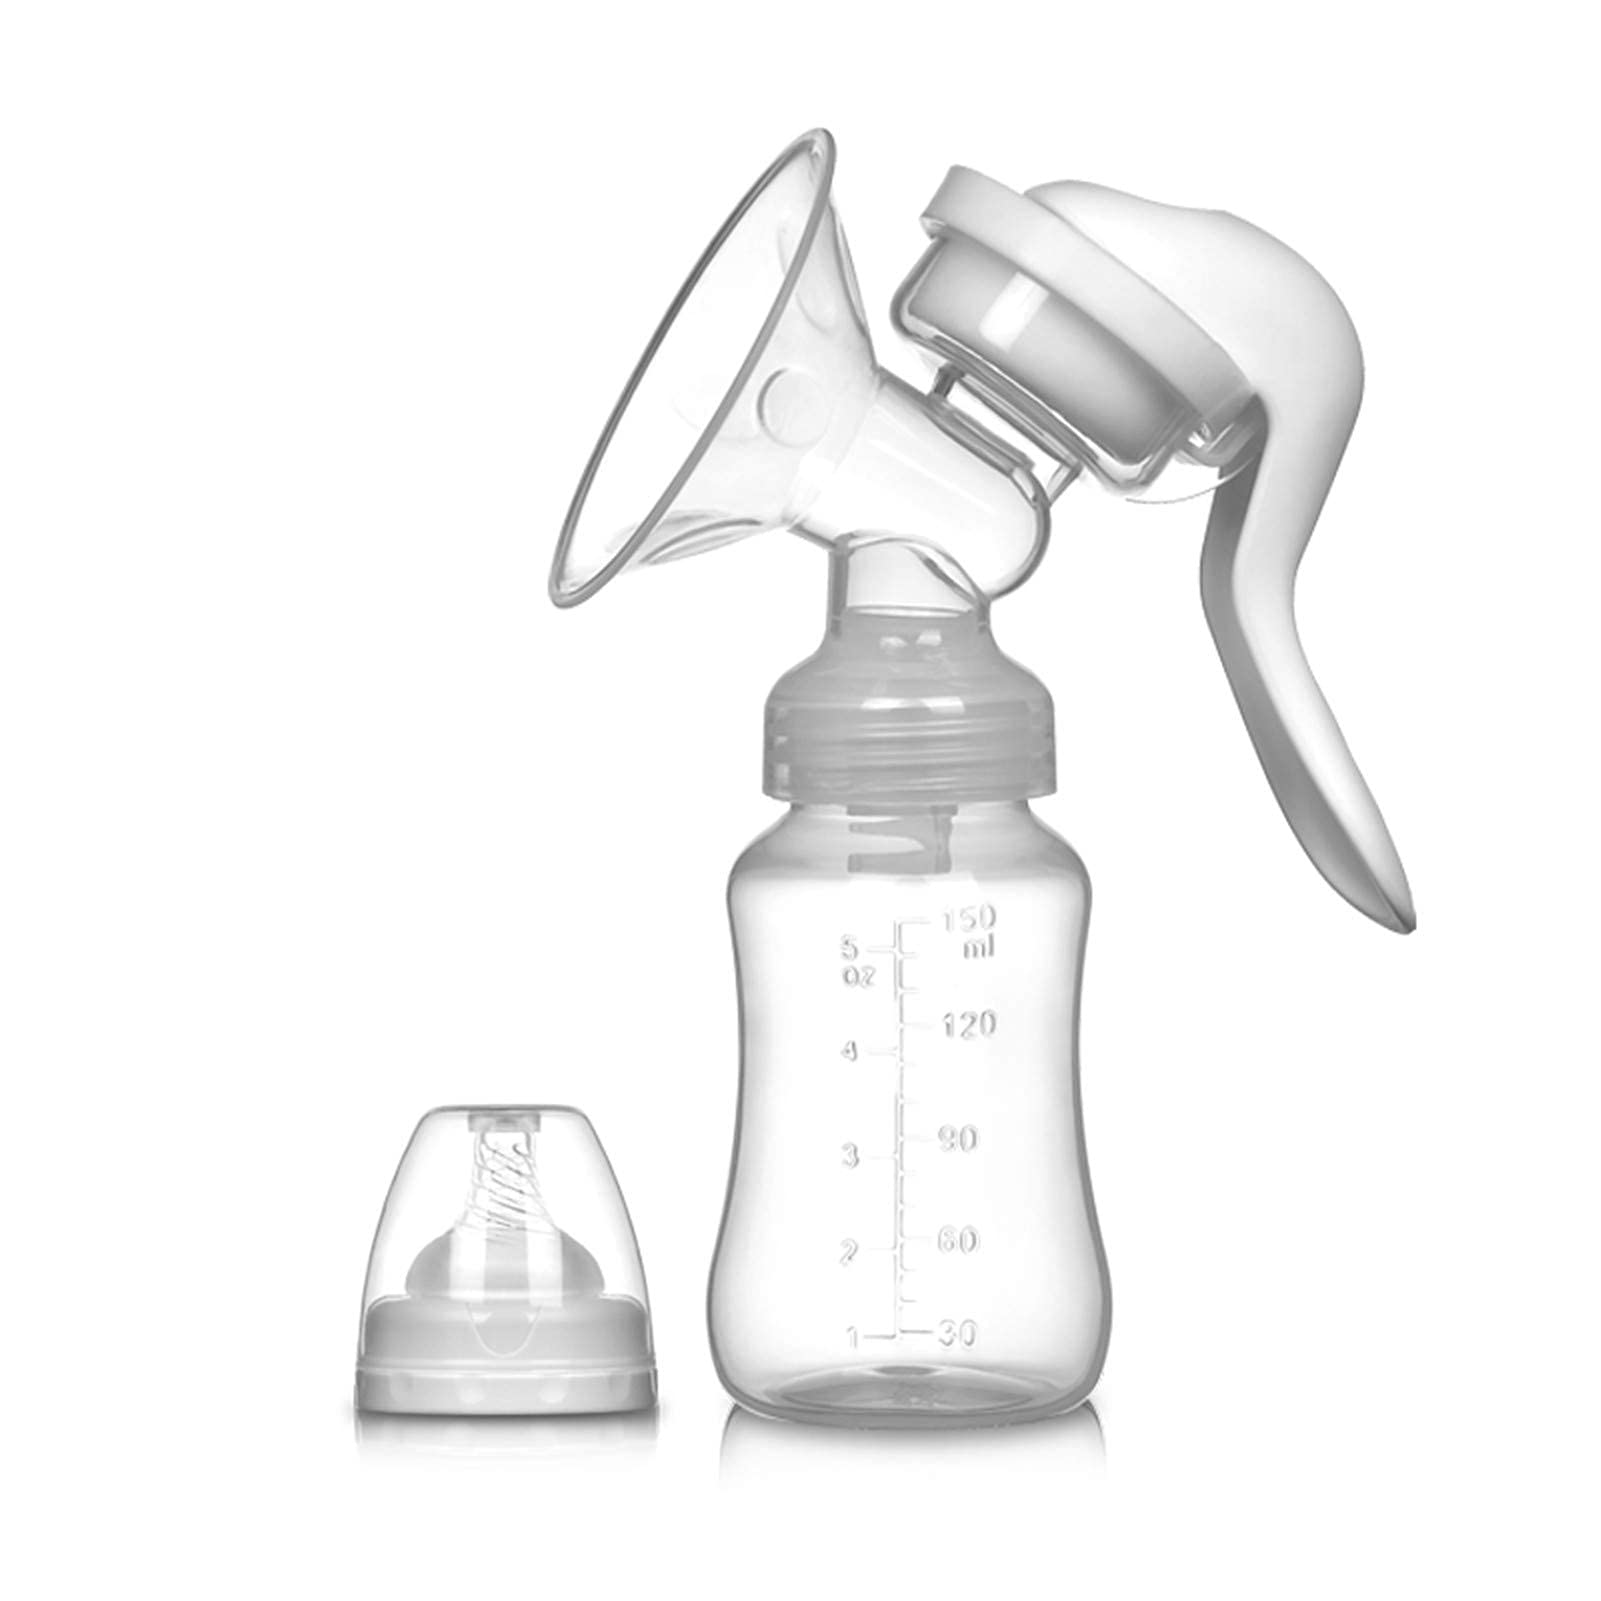 Ergonomic Manual Breast Pump - LOVNOV Single-Handed Manual Breast Pump with Adjustable Suction and Baby Bottle